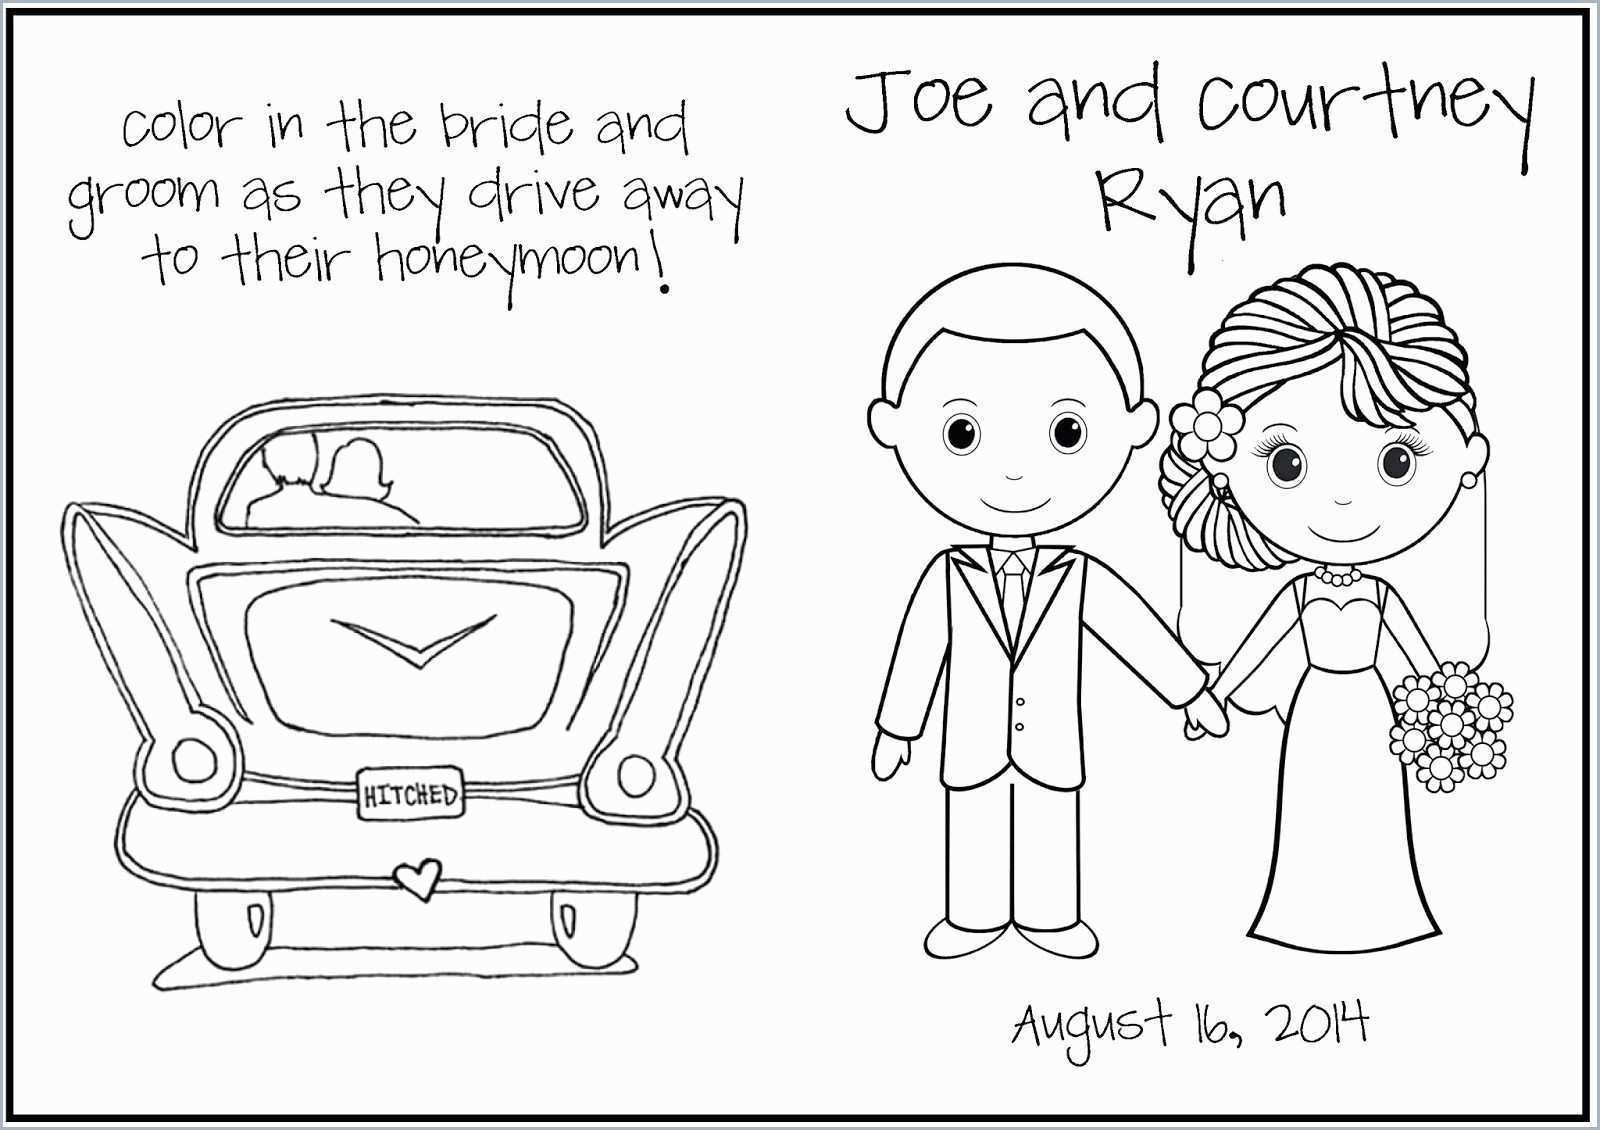 Coloring Pages : Marvelous Free Wedding Coloring Book Image - Wedding Coloring Book Free Printable